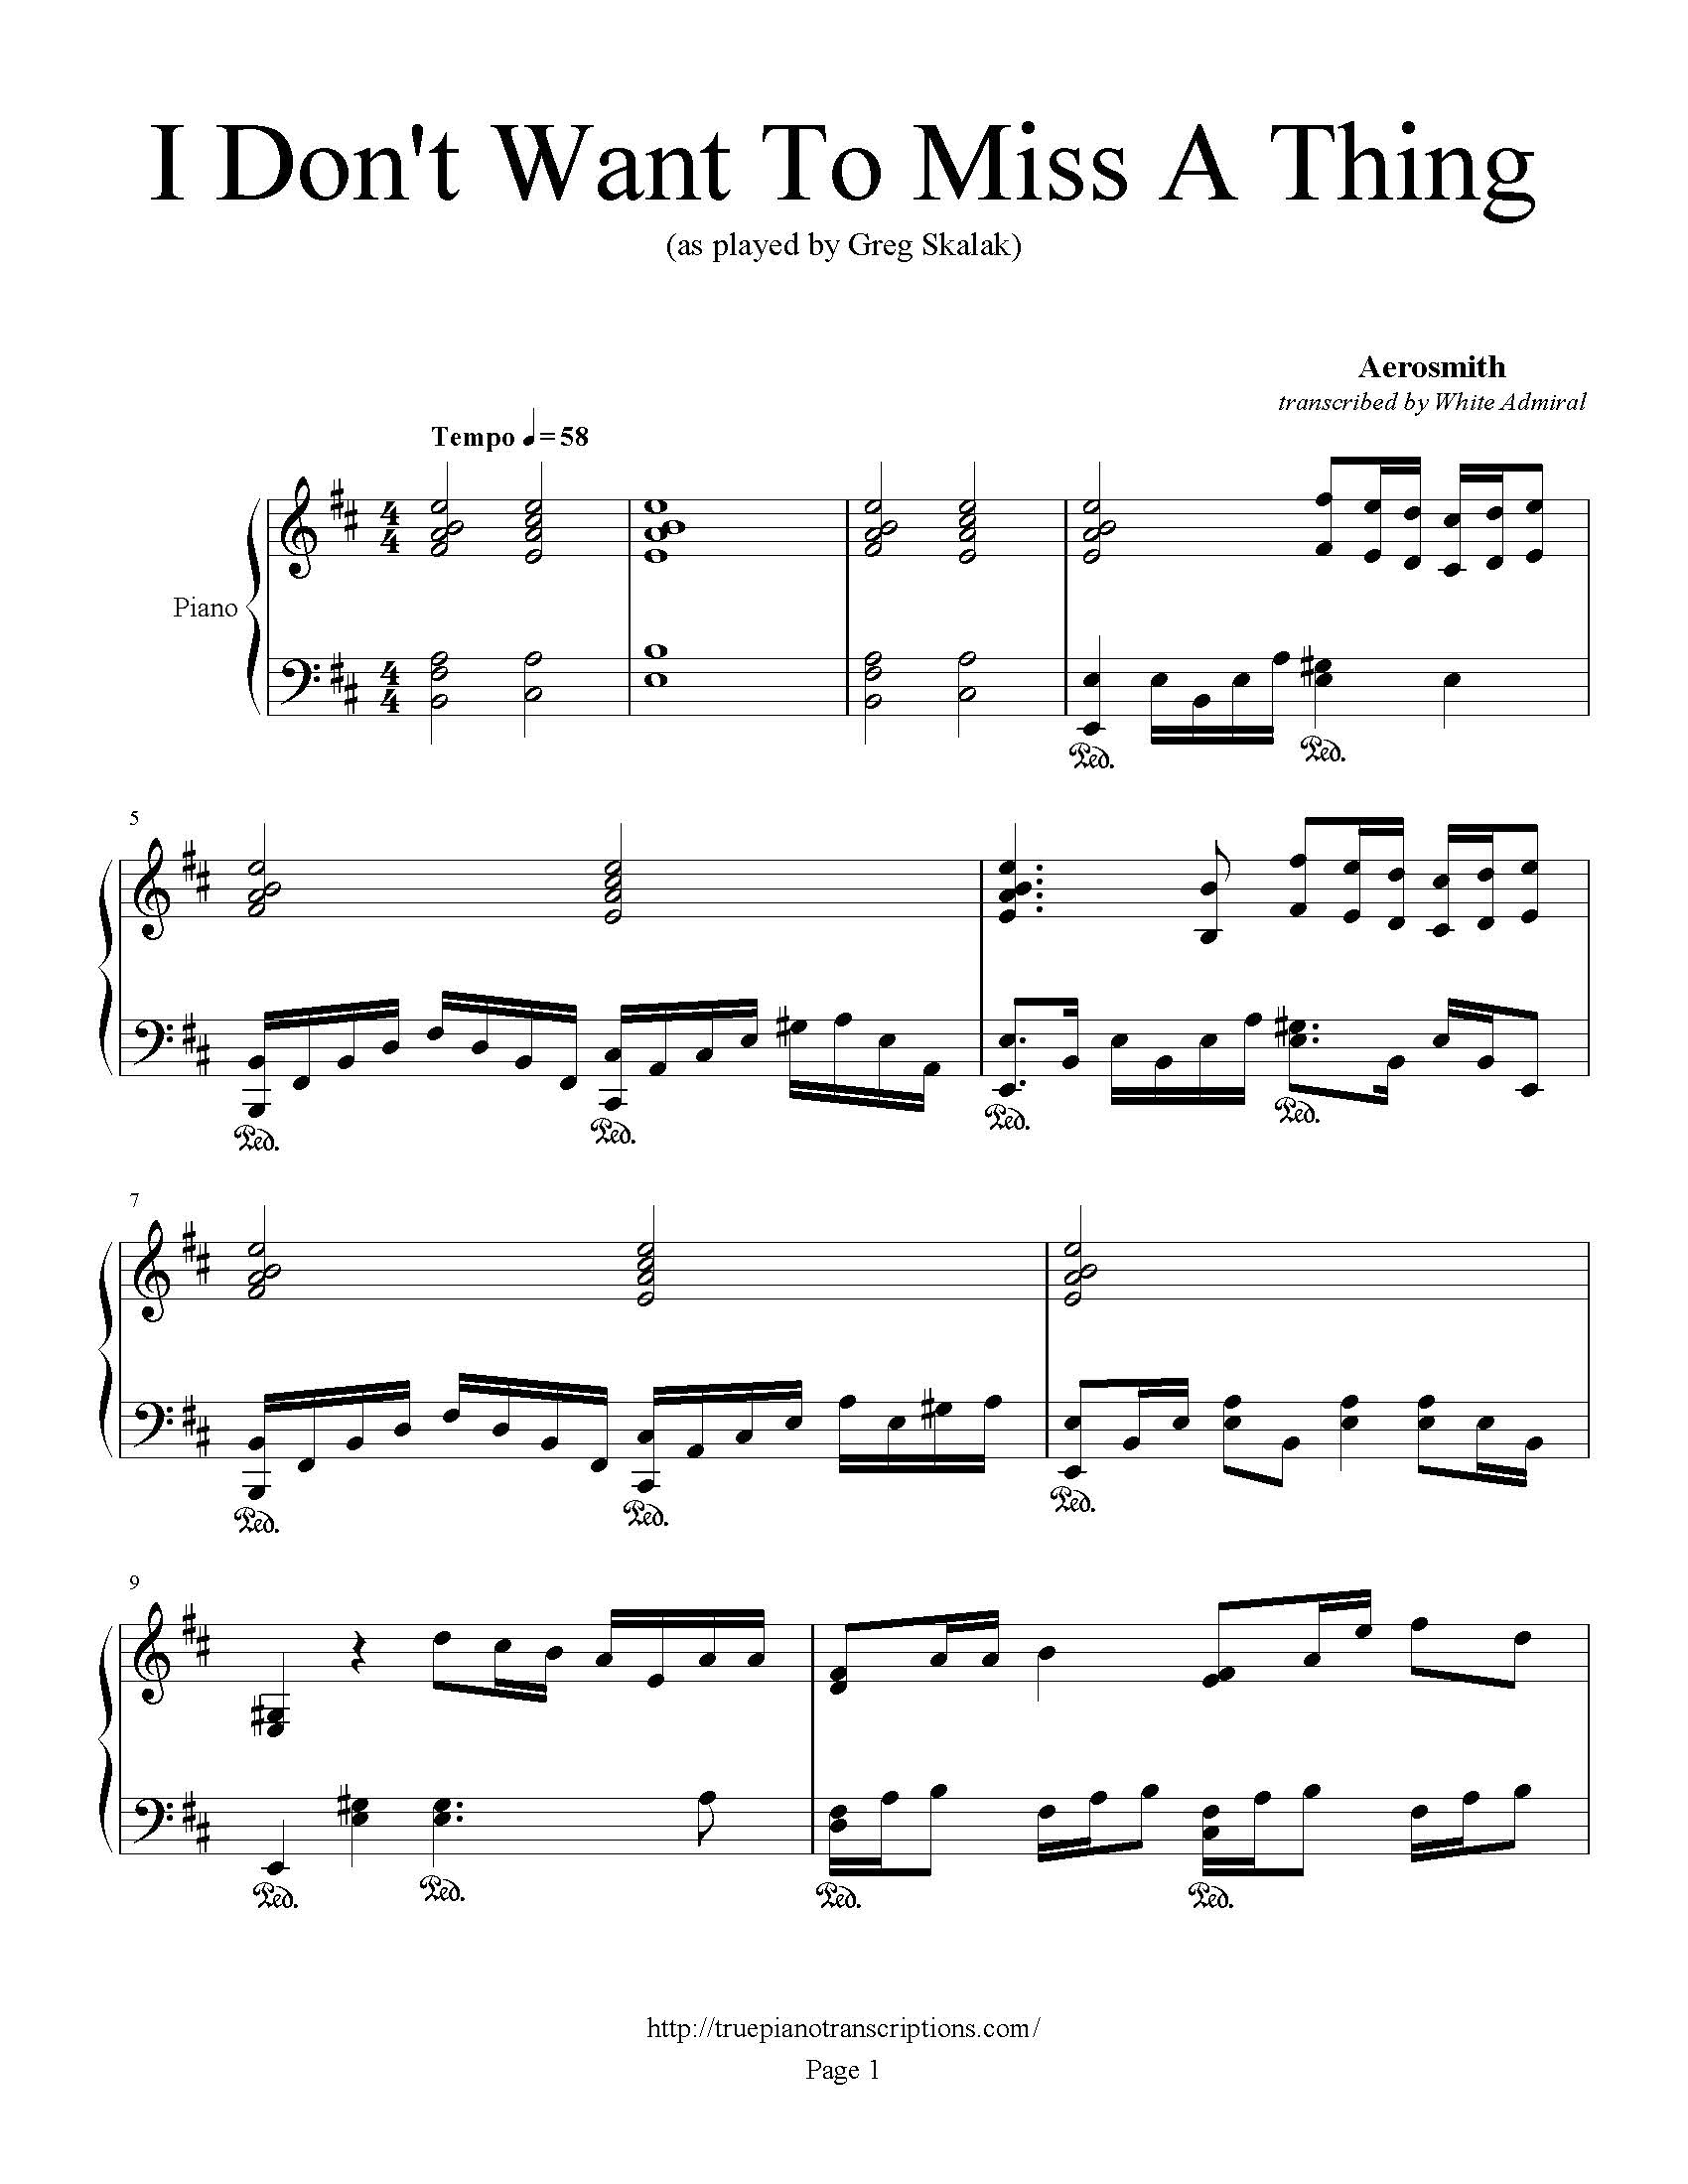 Free sheet music aerosmith i don't want to miss a thing